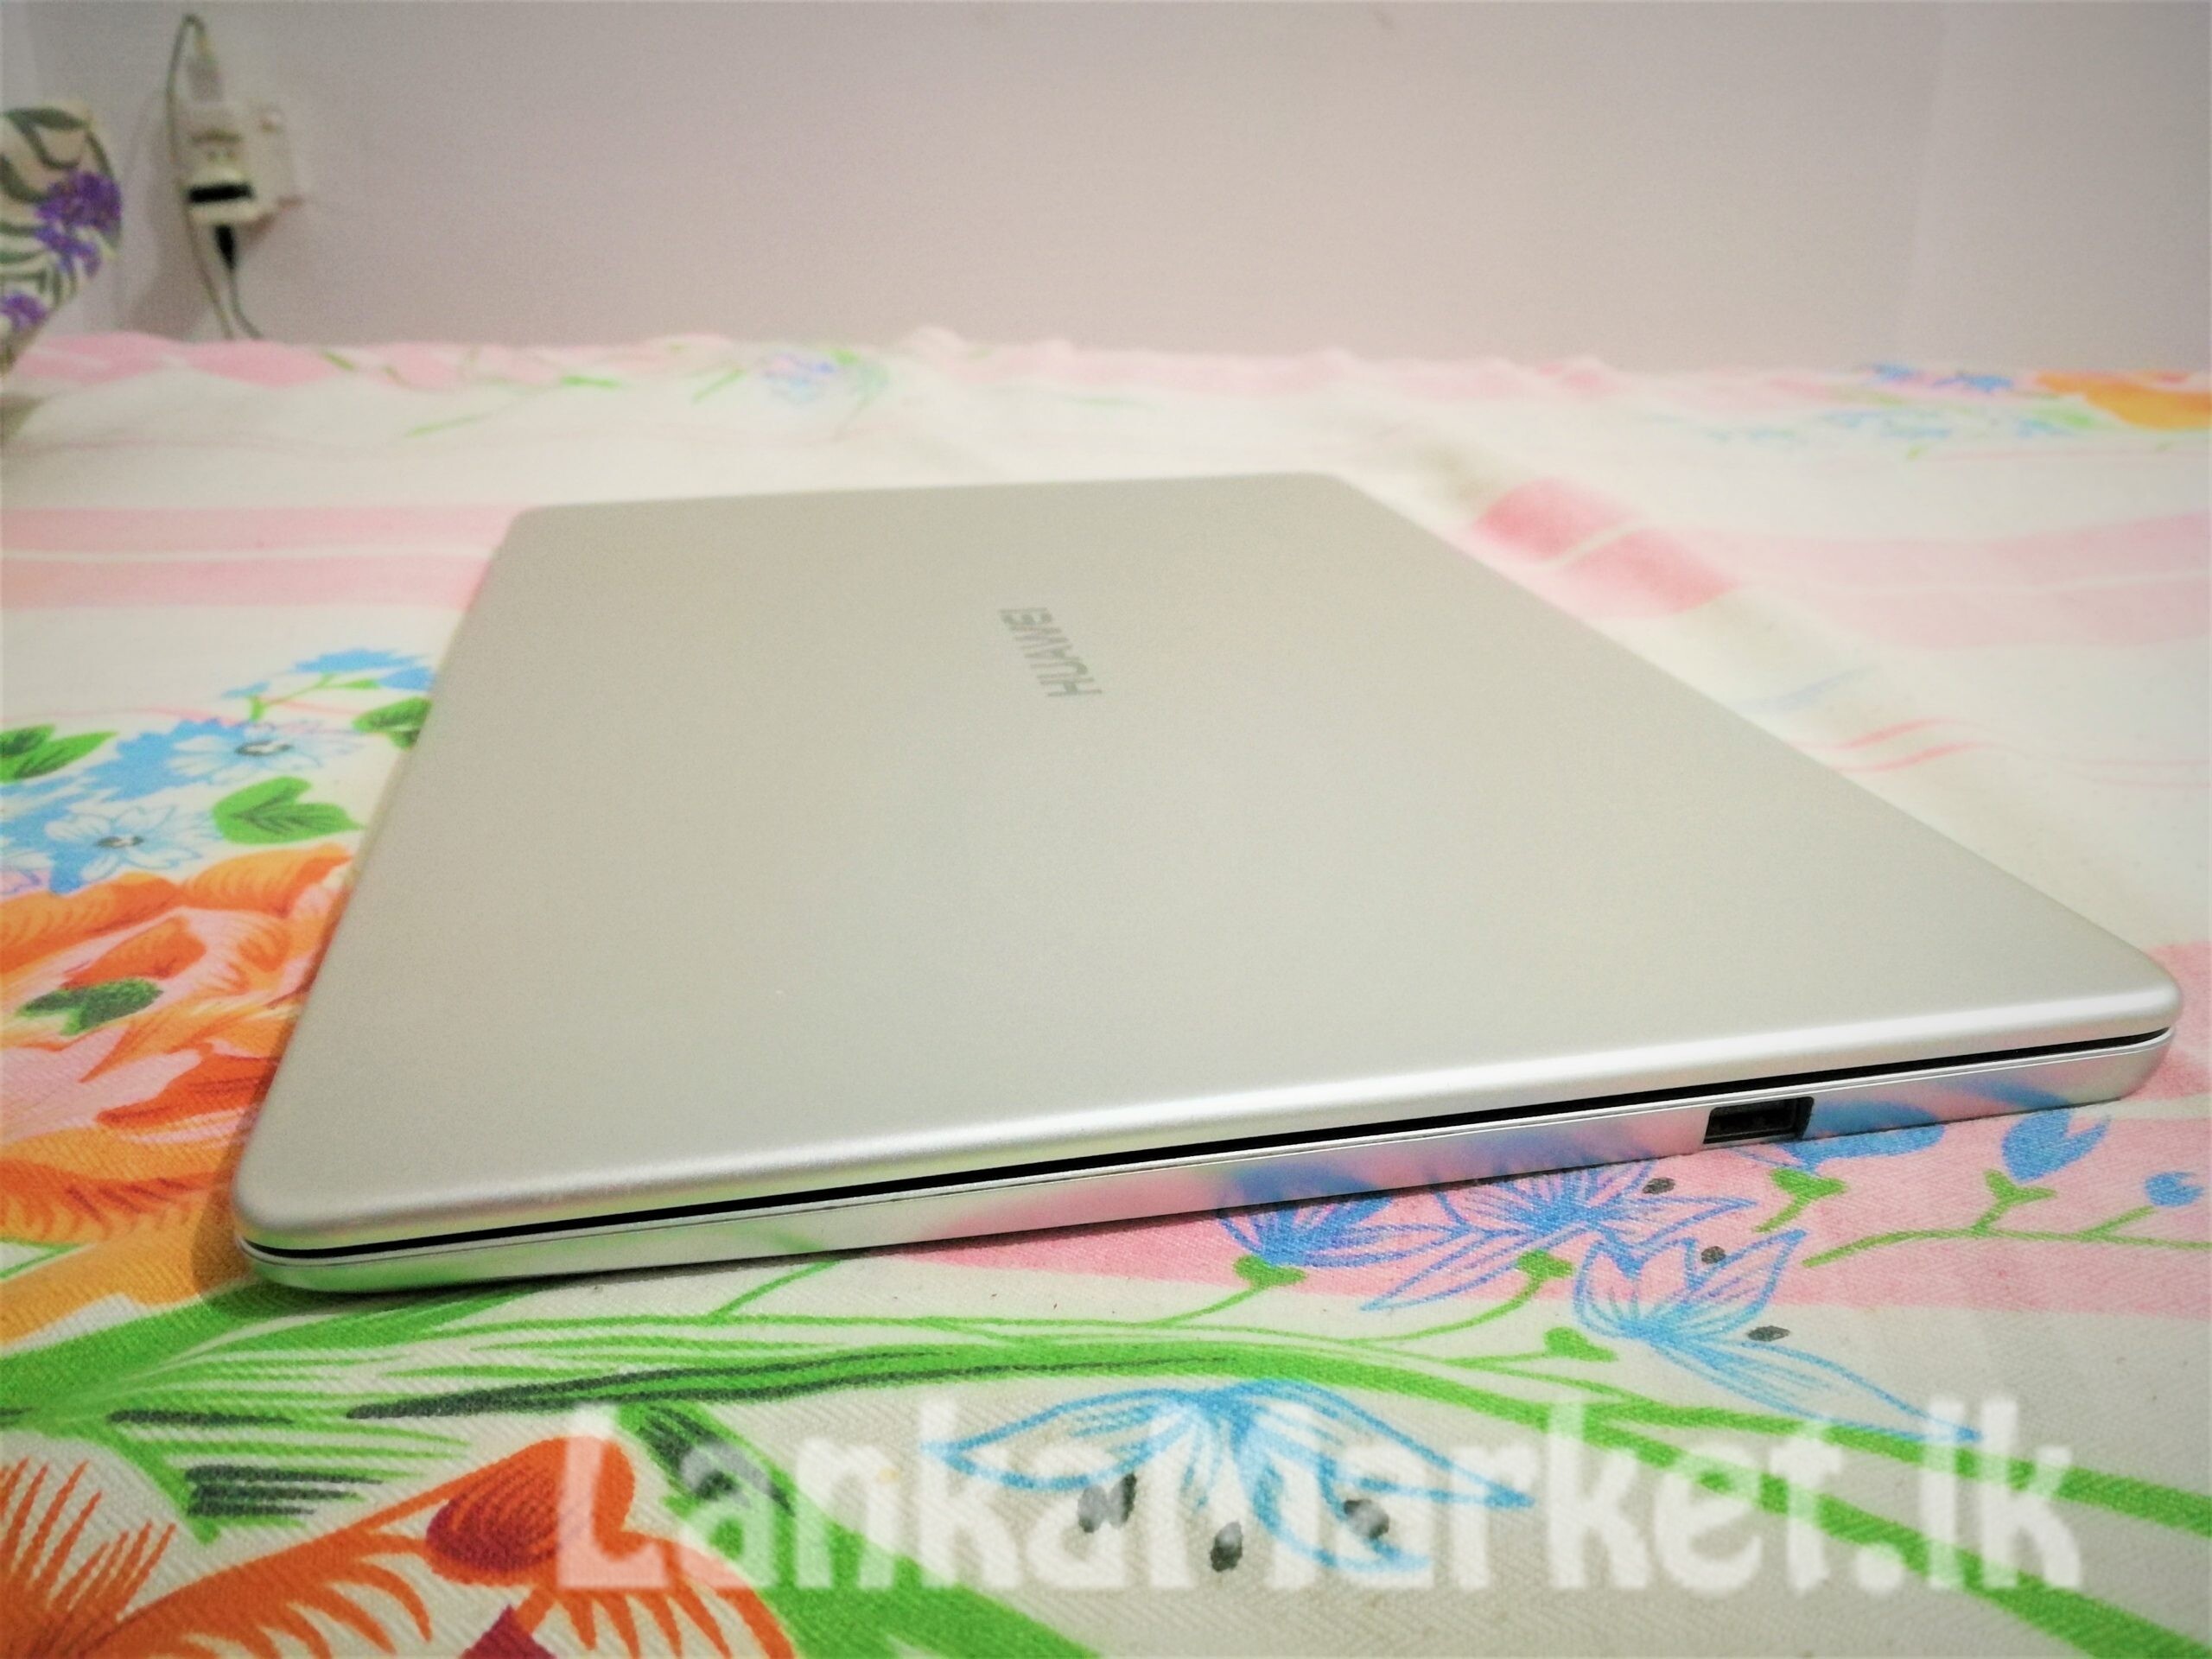 Laptop For Sale